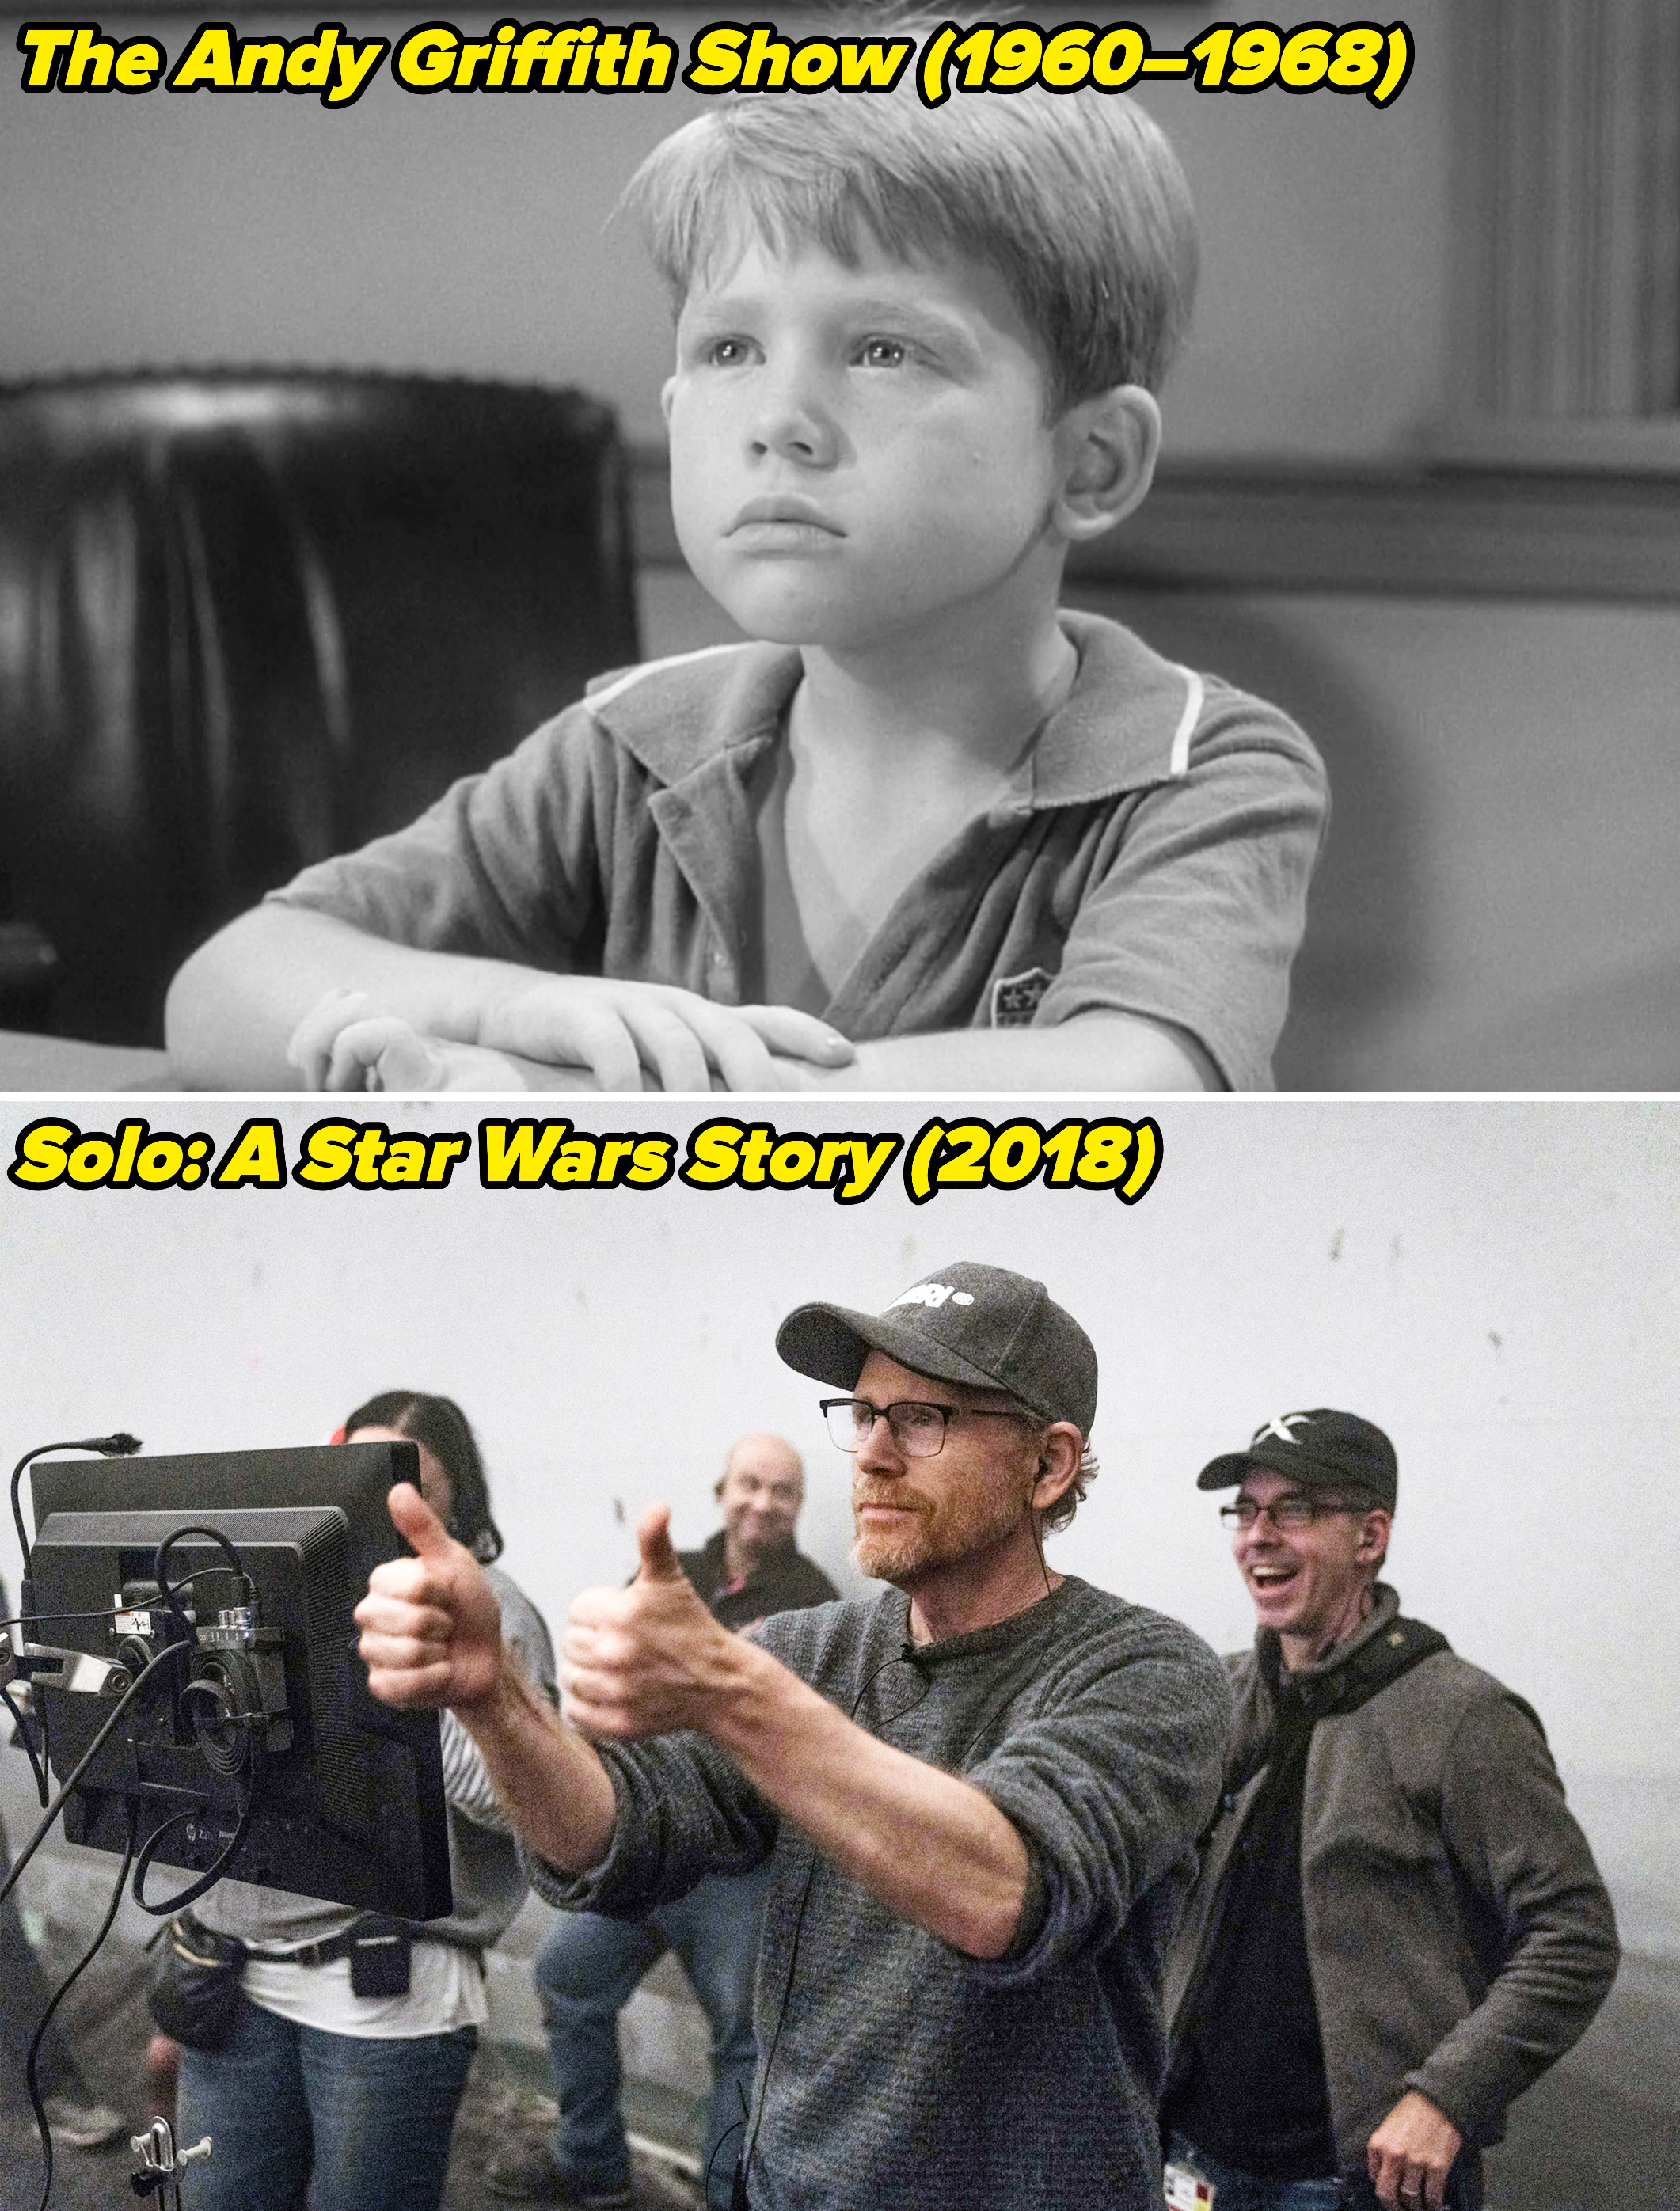 Ron in The Andy Griffith Show from 1960–1968 and directing Solo: A Star Wars Story in 2018